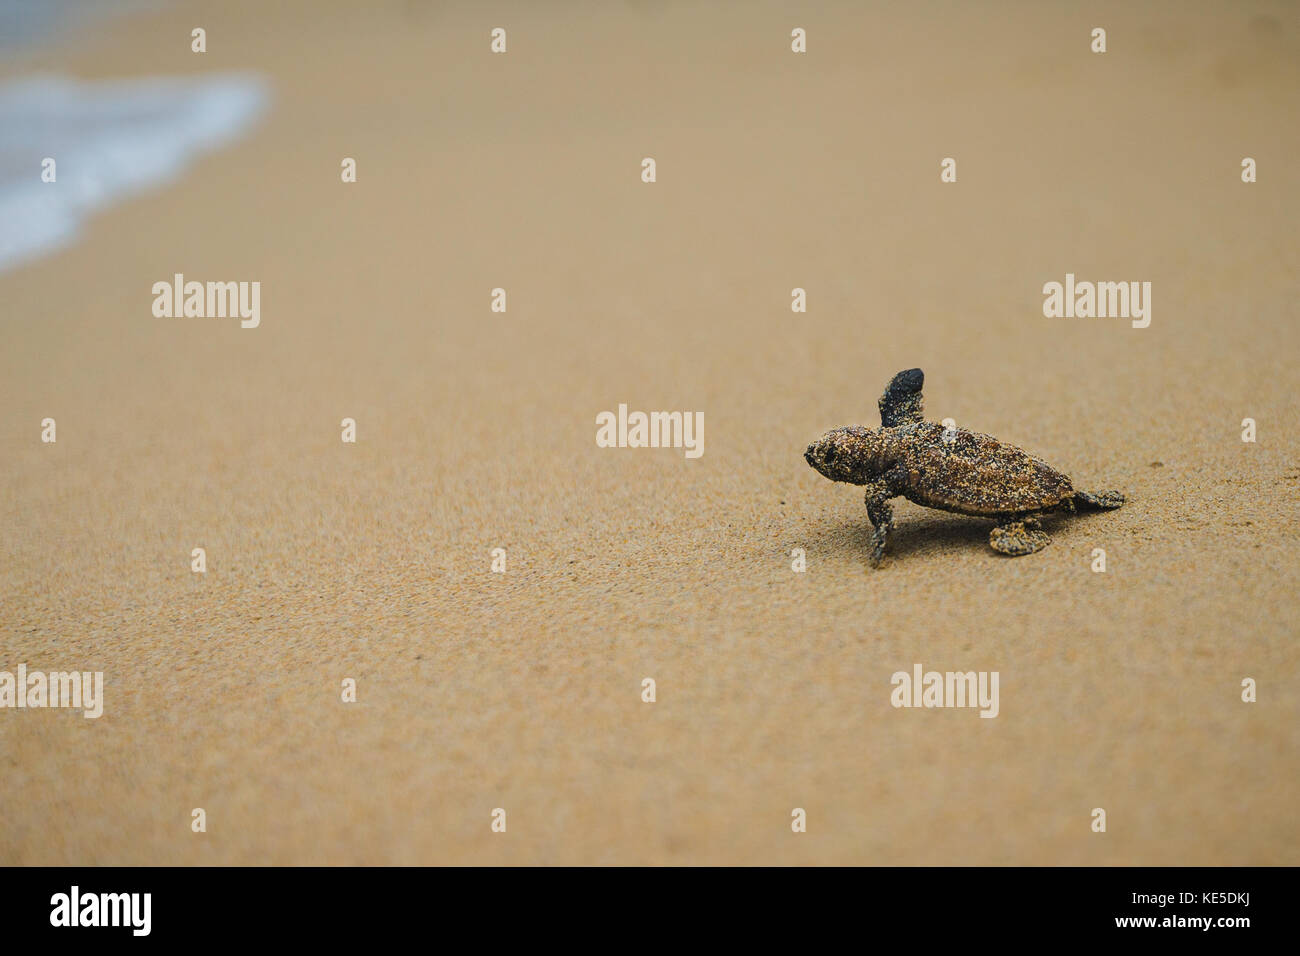 A baby Hawksbill turtle makes it's way to the ocean after hatching on Mullins beach on the Caribbean island of Barbados. Stock Photo